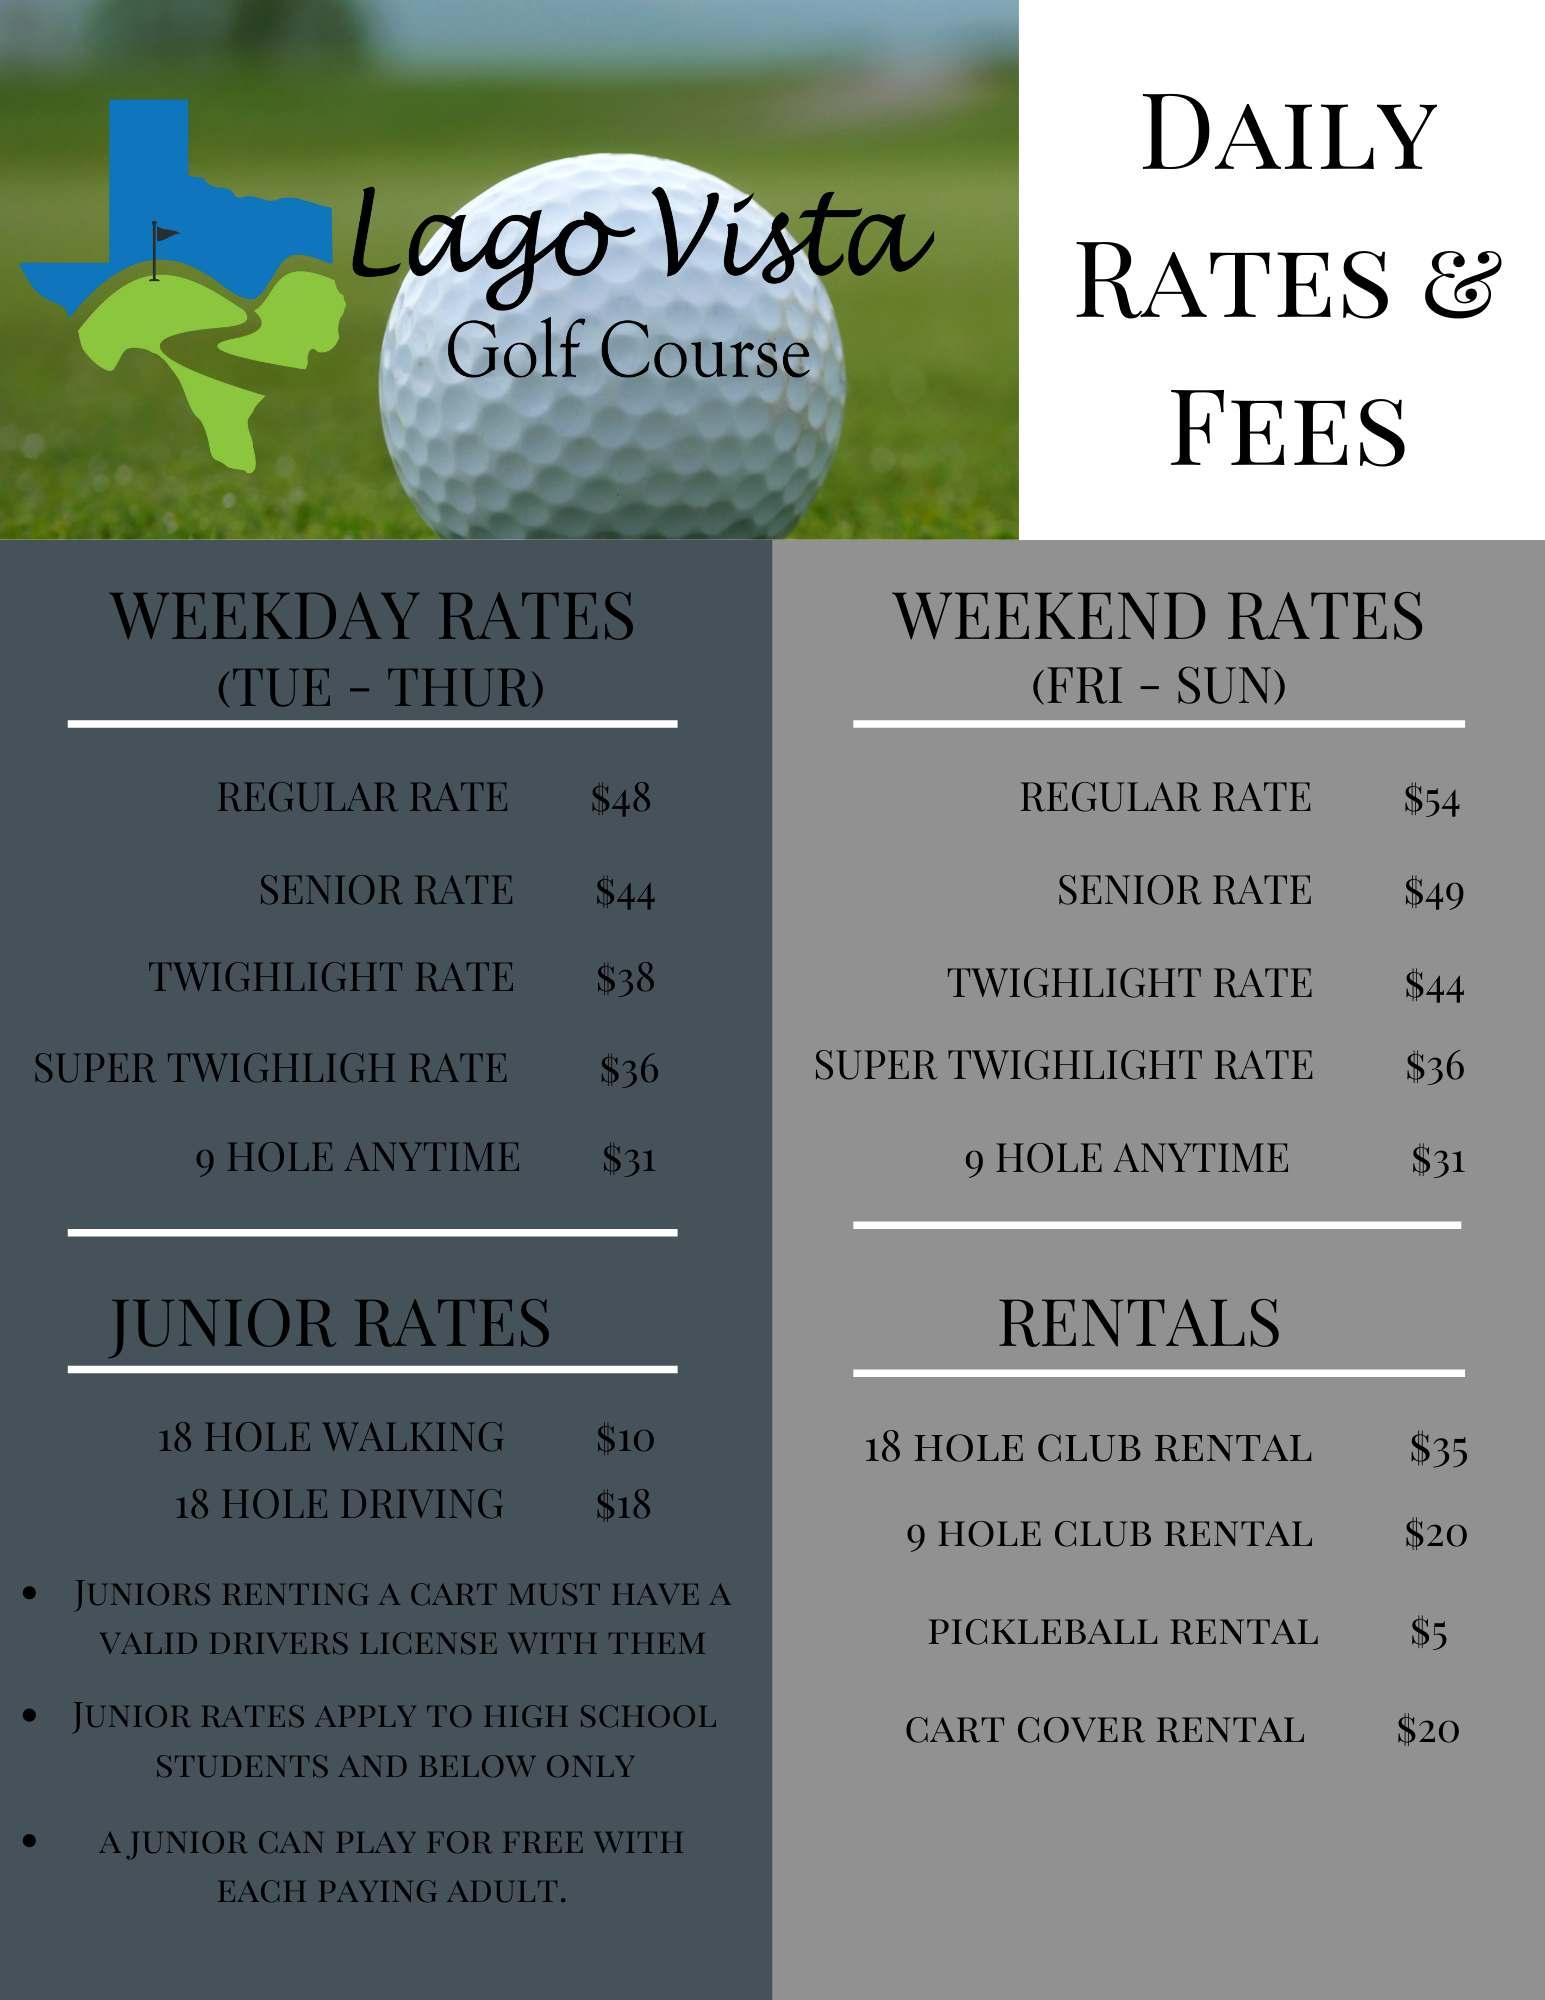 Fees Rates